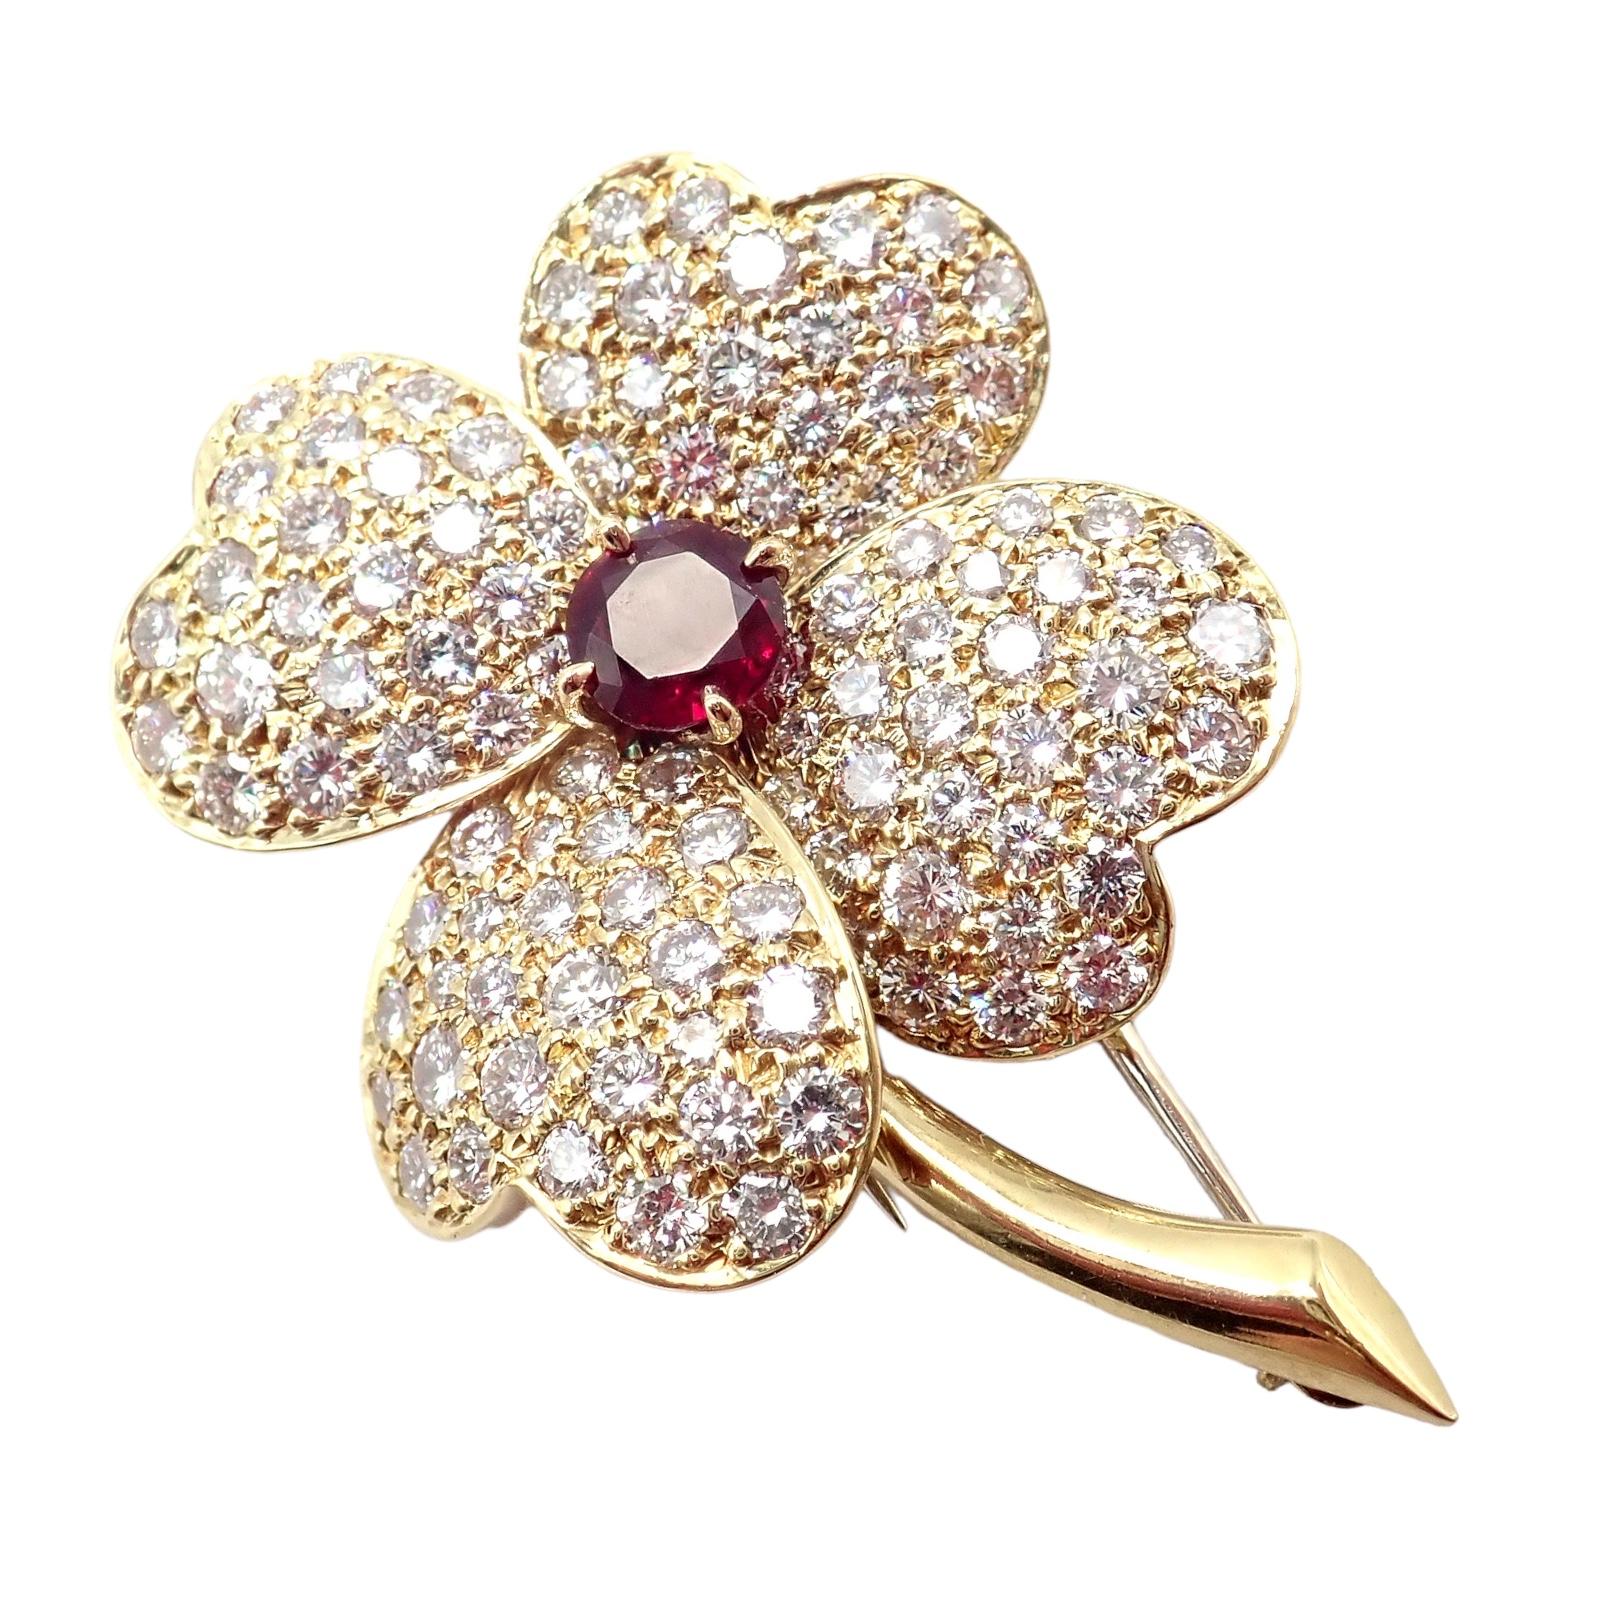 Van Cleef & Arpels Cosmos Diamond And Ruby Yellow Gold Pendant Brooch For Sale 1